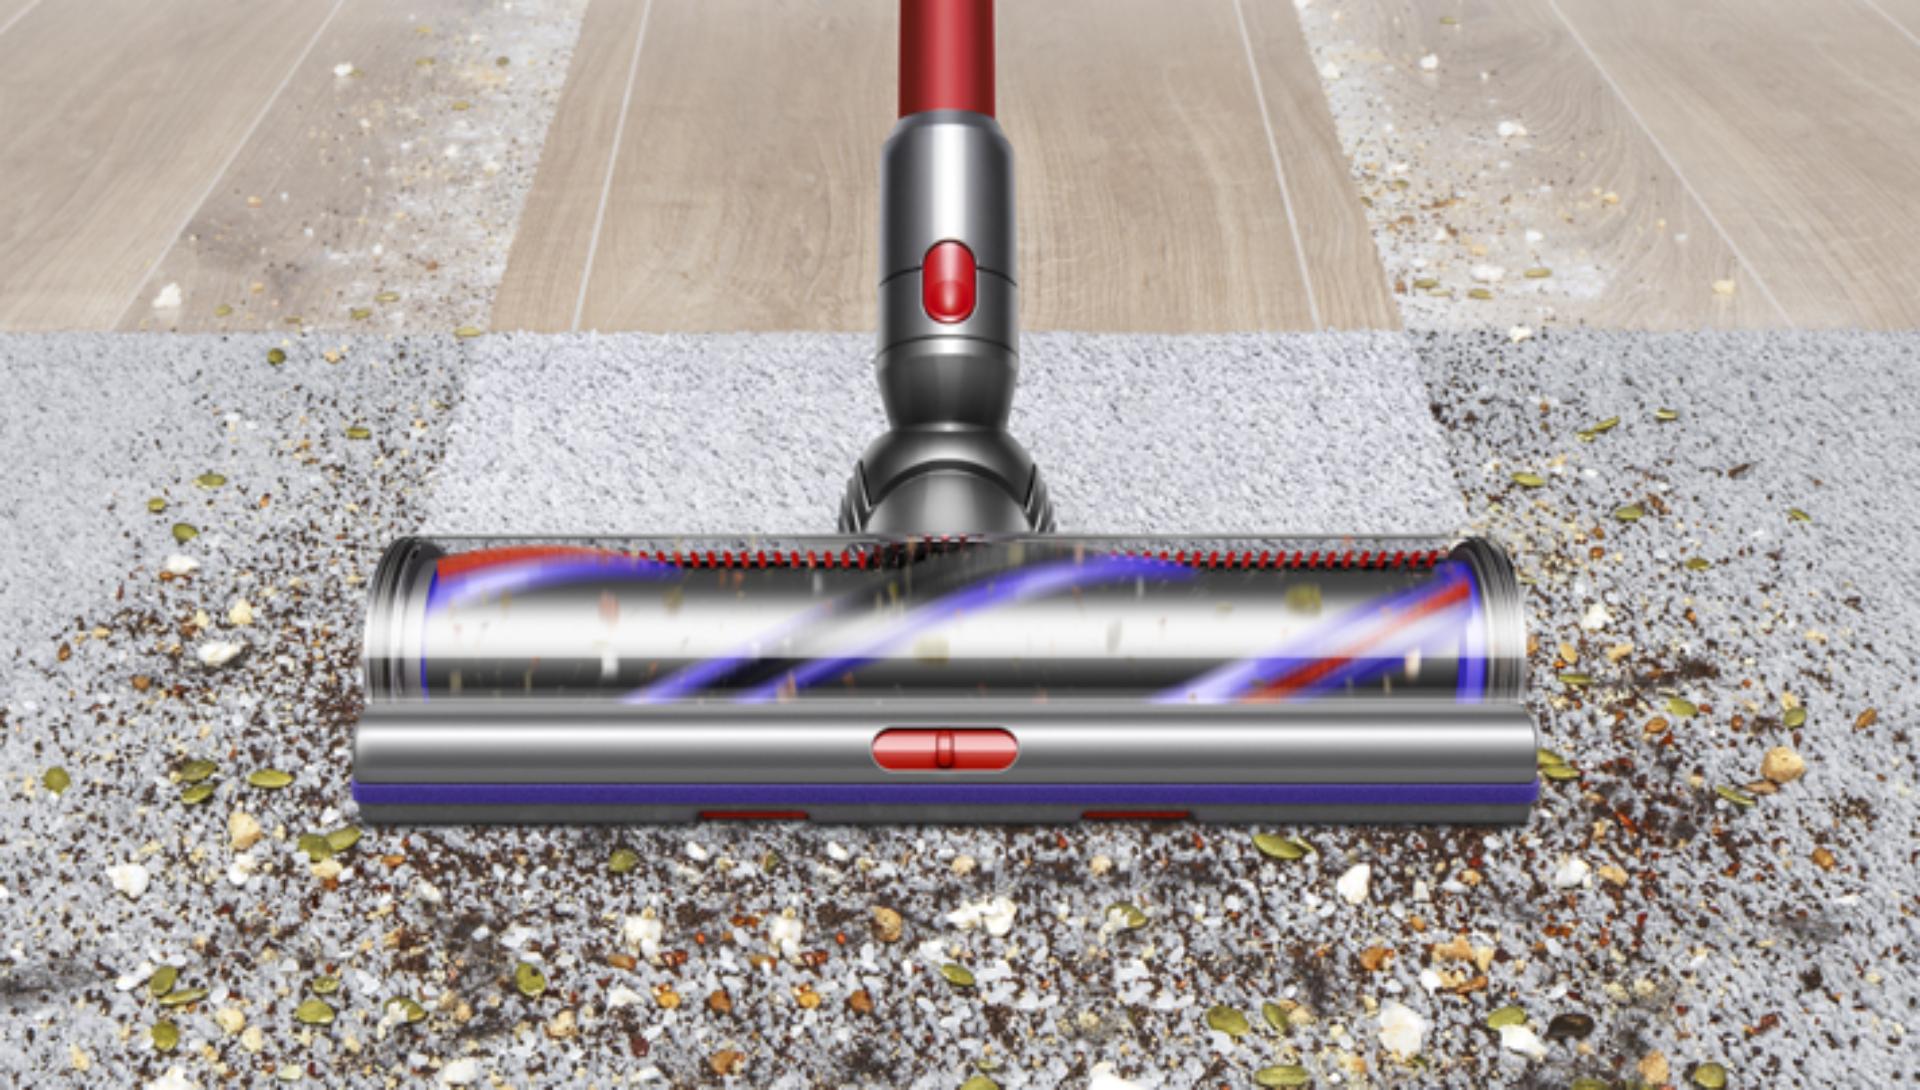 High Torque XL cleaner head moving from hard floor to carpet